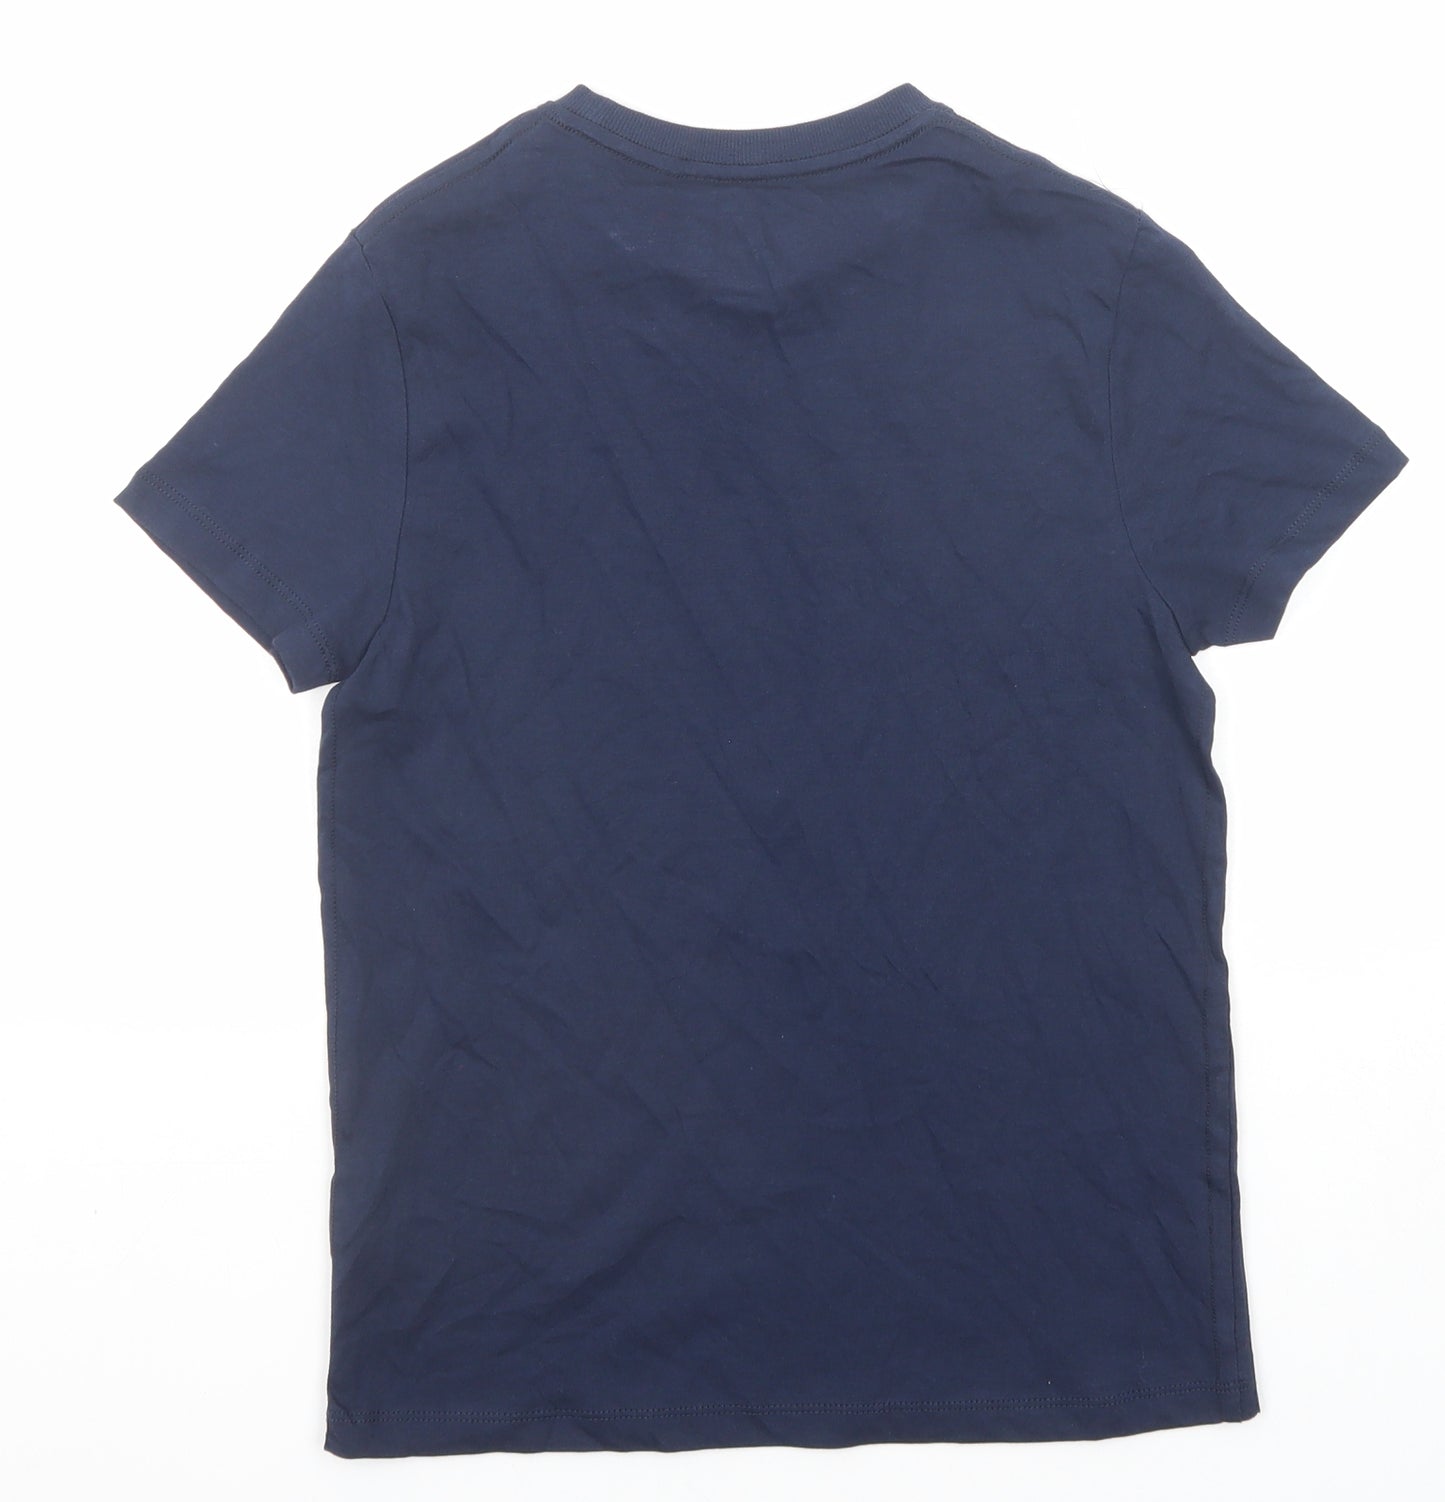 Marks and Spencer Boys Blue Cotton Basic T-Shirt Size 10-11 Years Round Neck Pullover